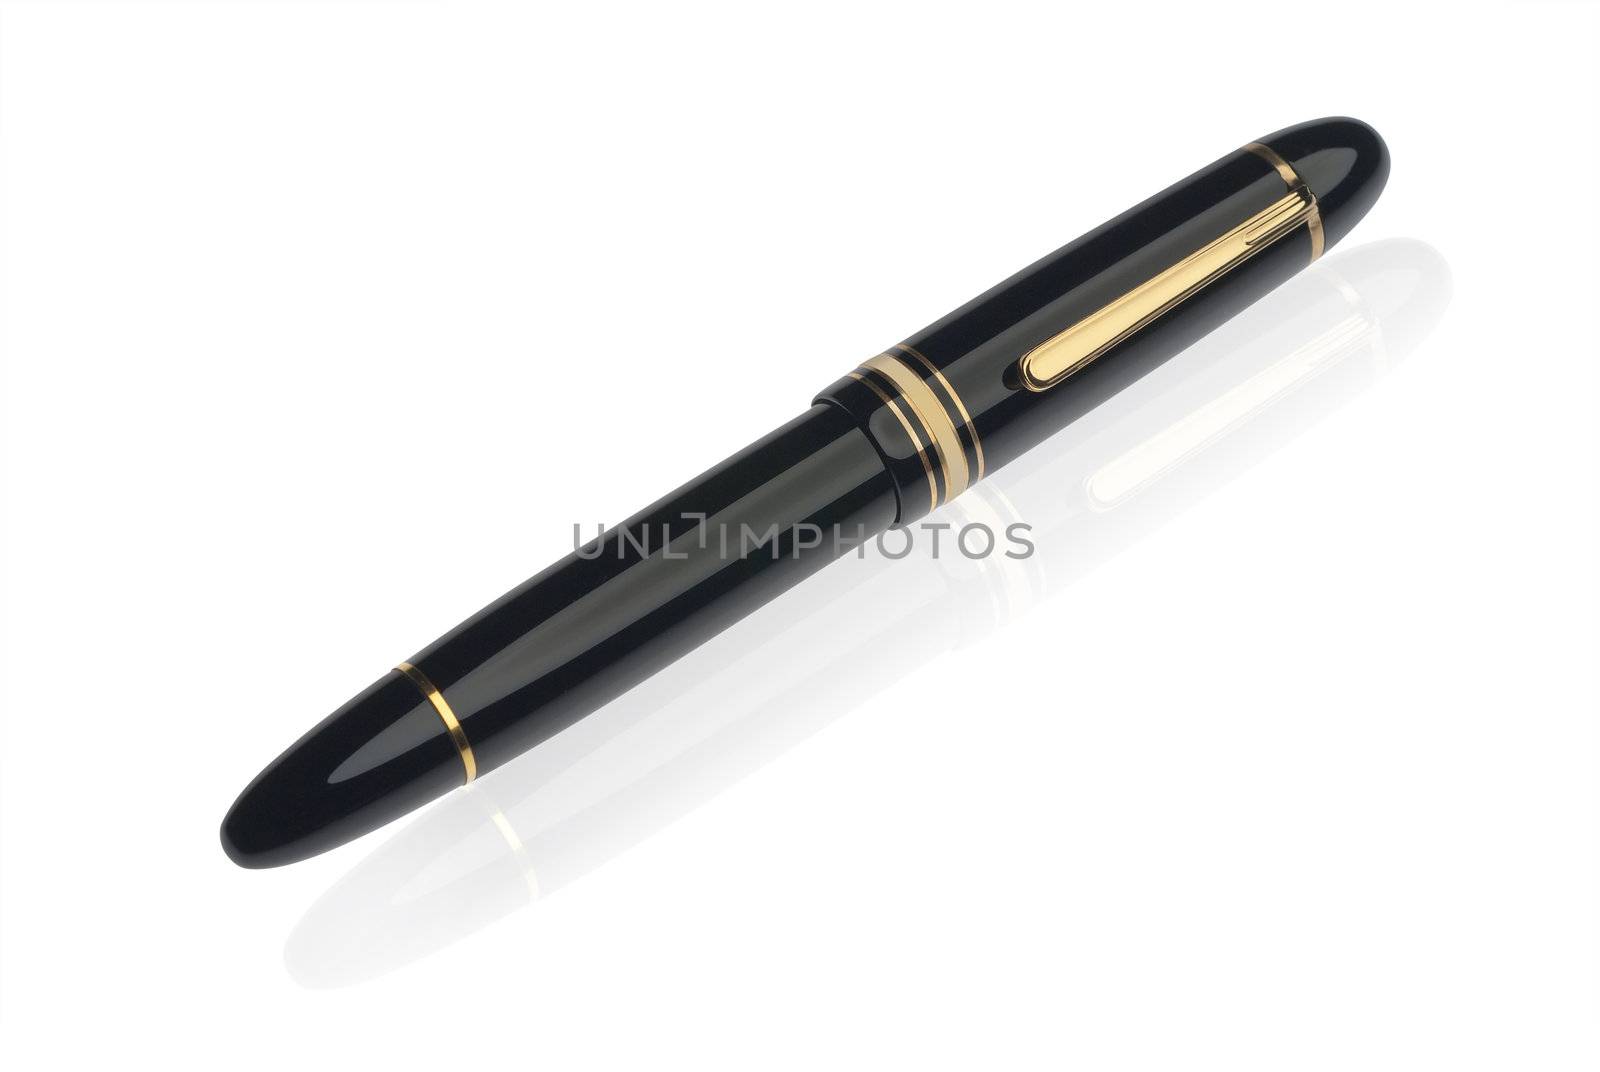 Closed german fountain pen on reflective surface, isolated with clipping path